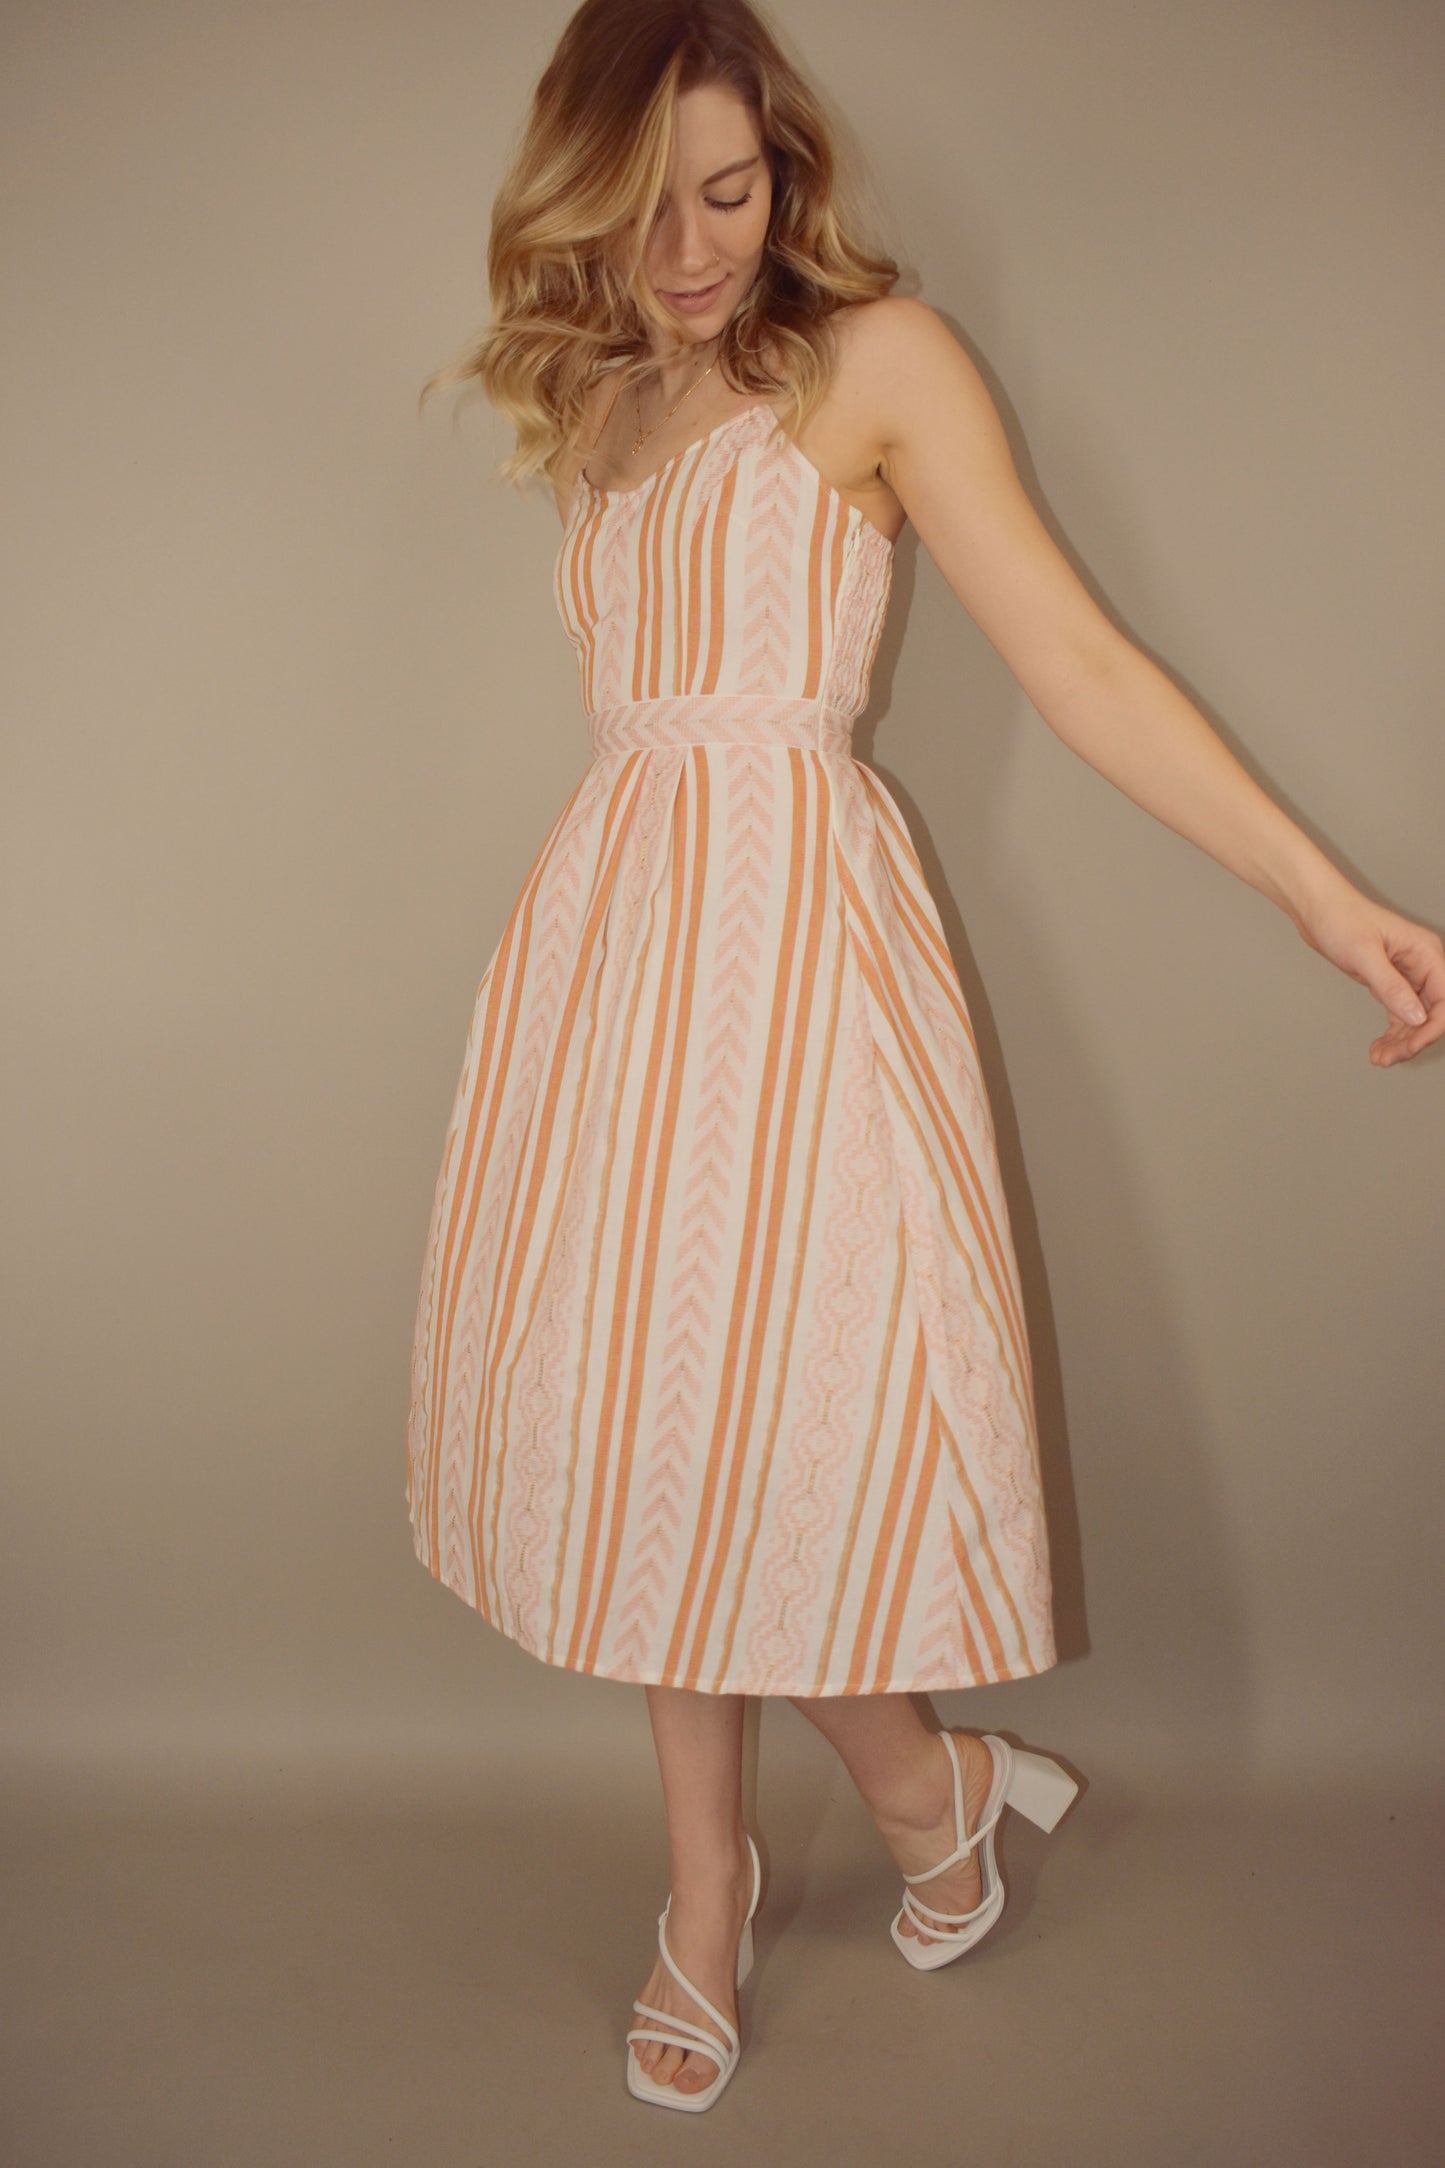 Stripe and chevron patterned midi dress with fitted bodice and zip enclosure. adjustable spaghetti straps. lined and a little bit of swing to it. slight v in front. smocked upper back. criss cross straps